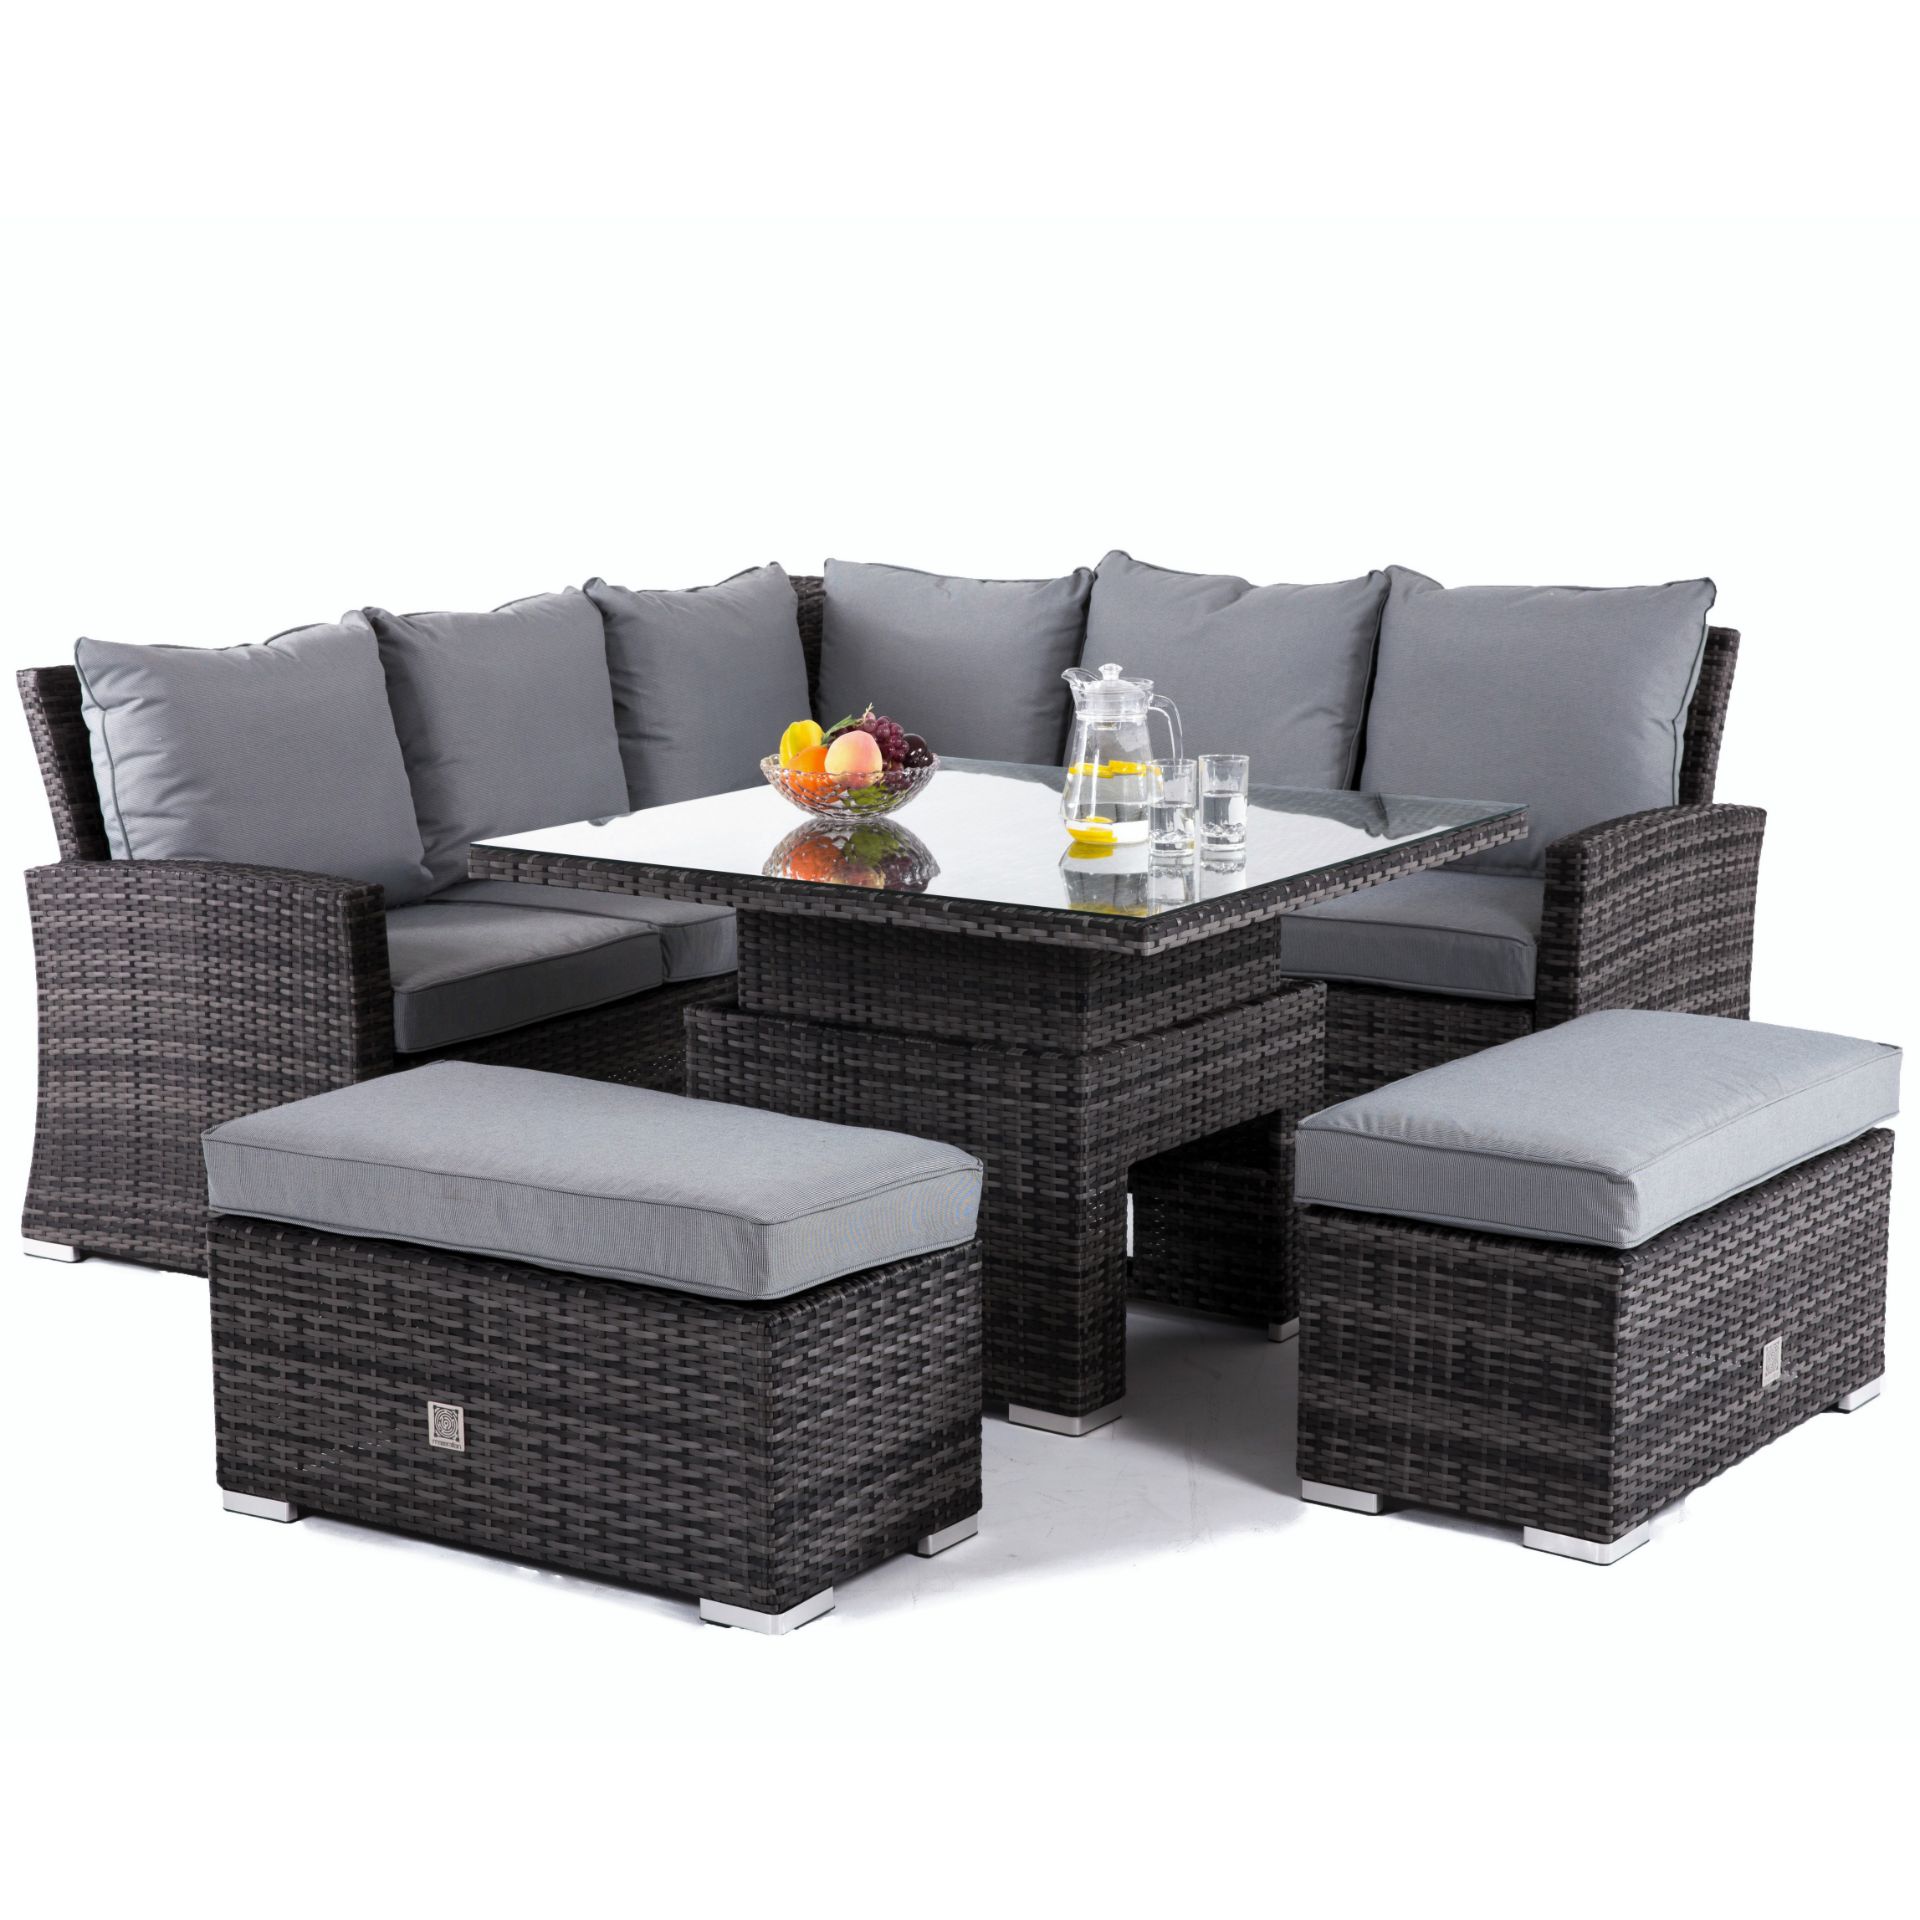 (RESERVE MET) Rattan Richmond Corner Dining Set With Rising Table (Grey) *BRAND NEW* - Image 3 of 3